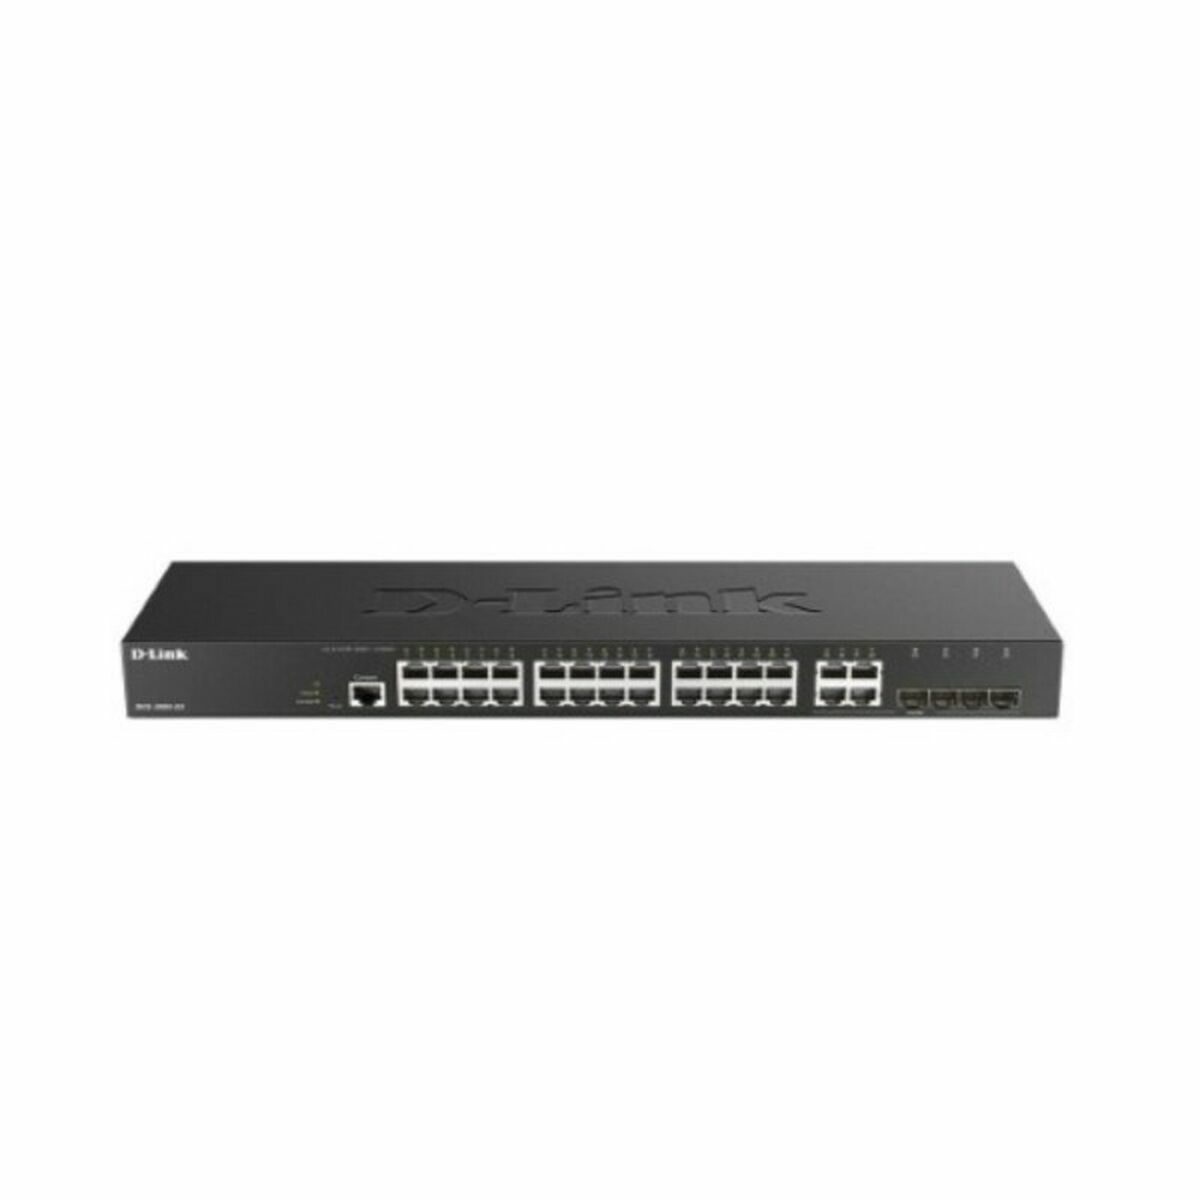 Switch D-Link DGS-2000-28 56 Gbps 10/100/1000 BASE-T x 24 Negro